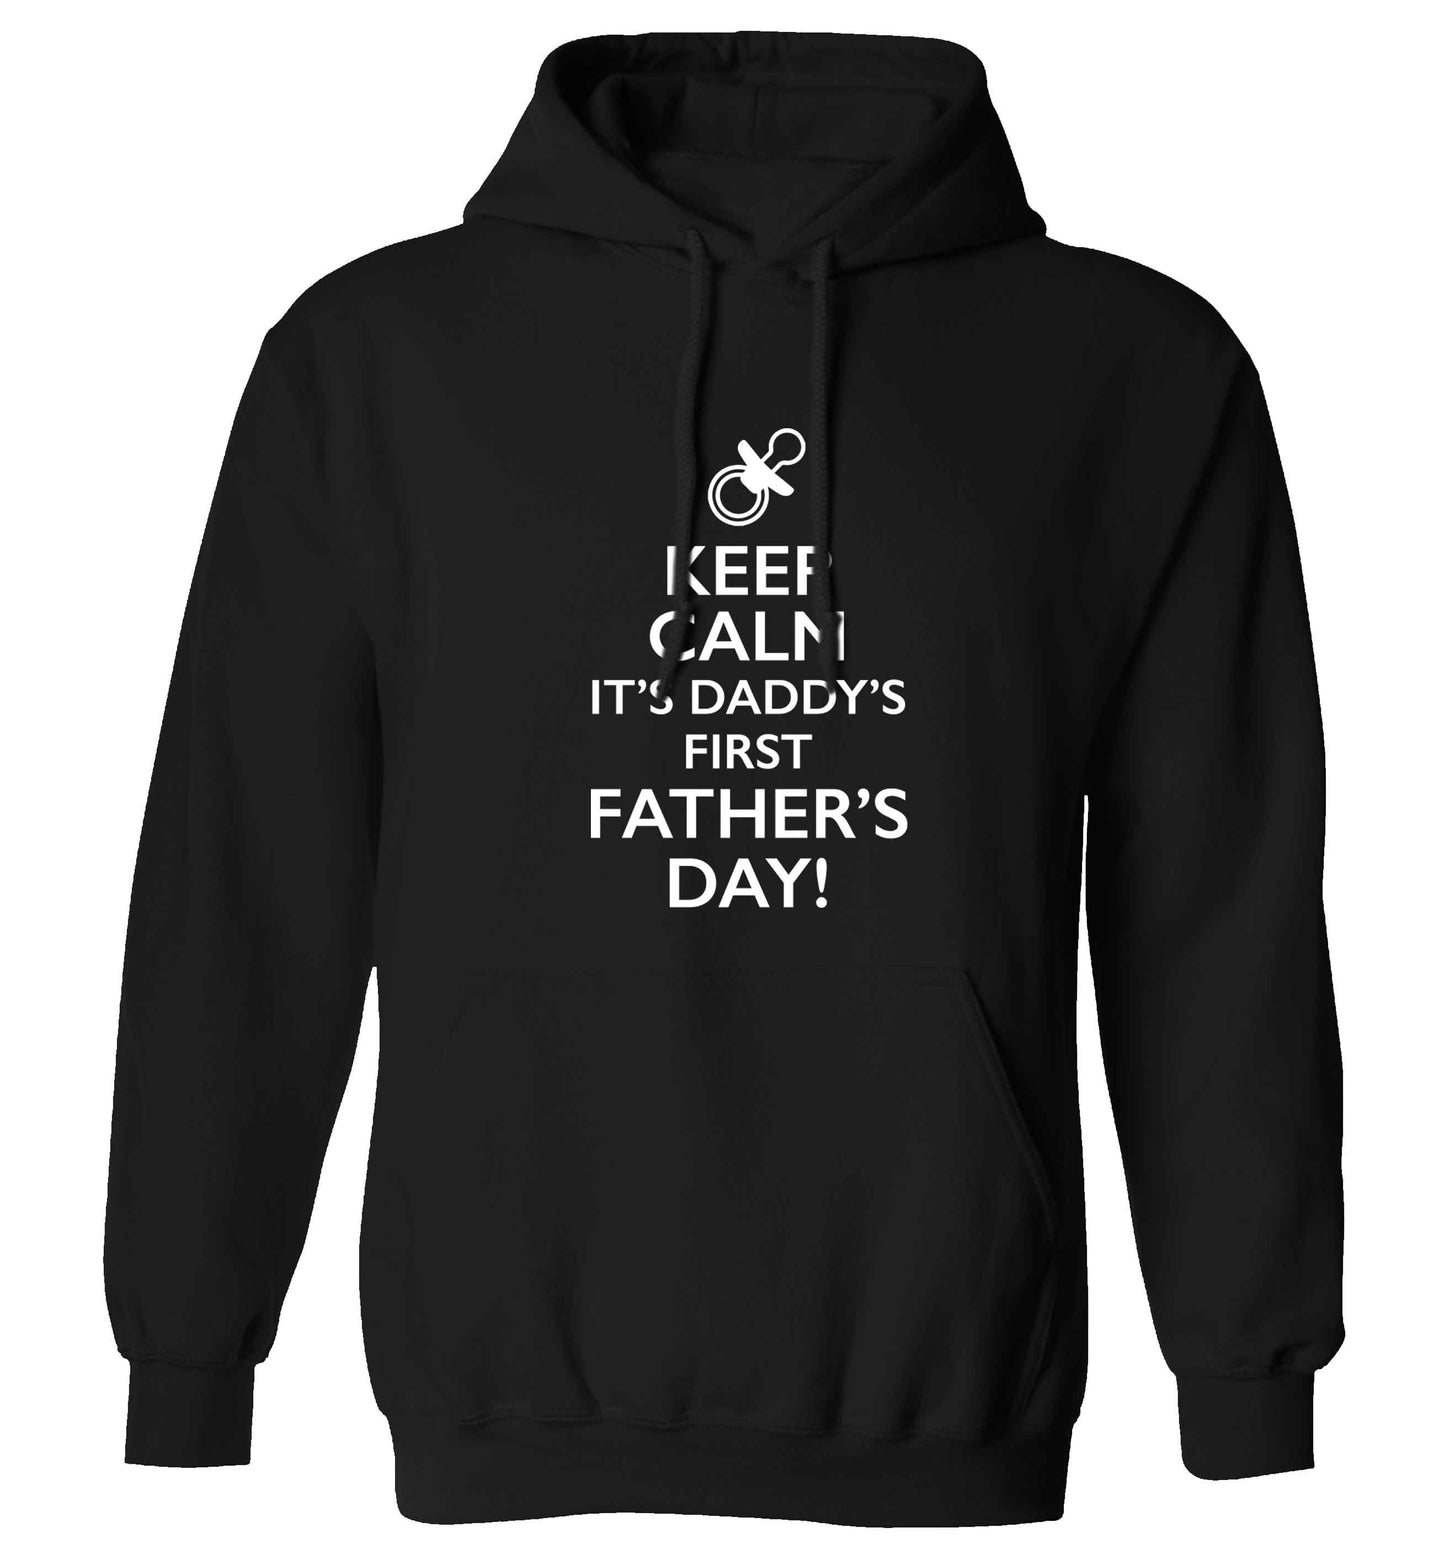 Keep calm it's daddys first father's day adults unisex black hoodie 2XL